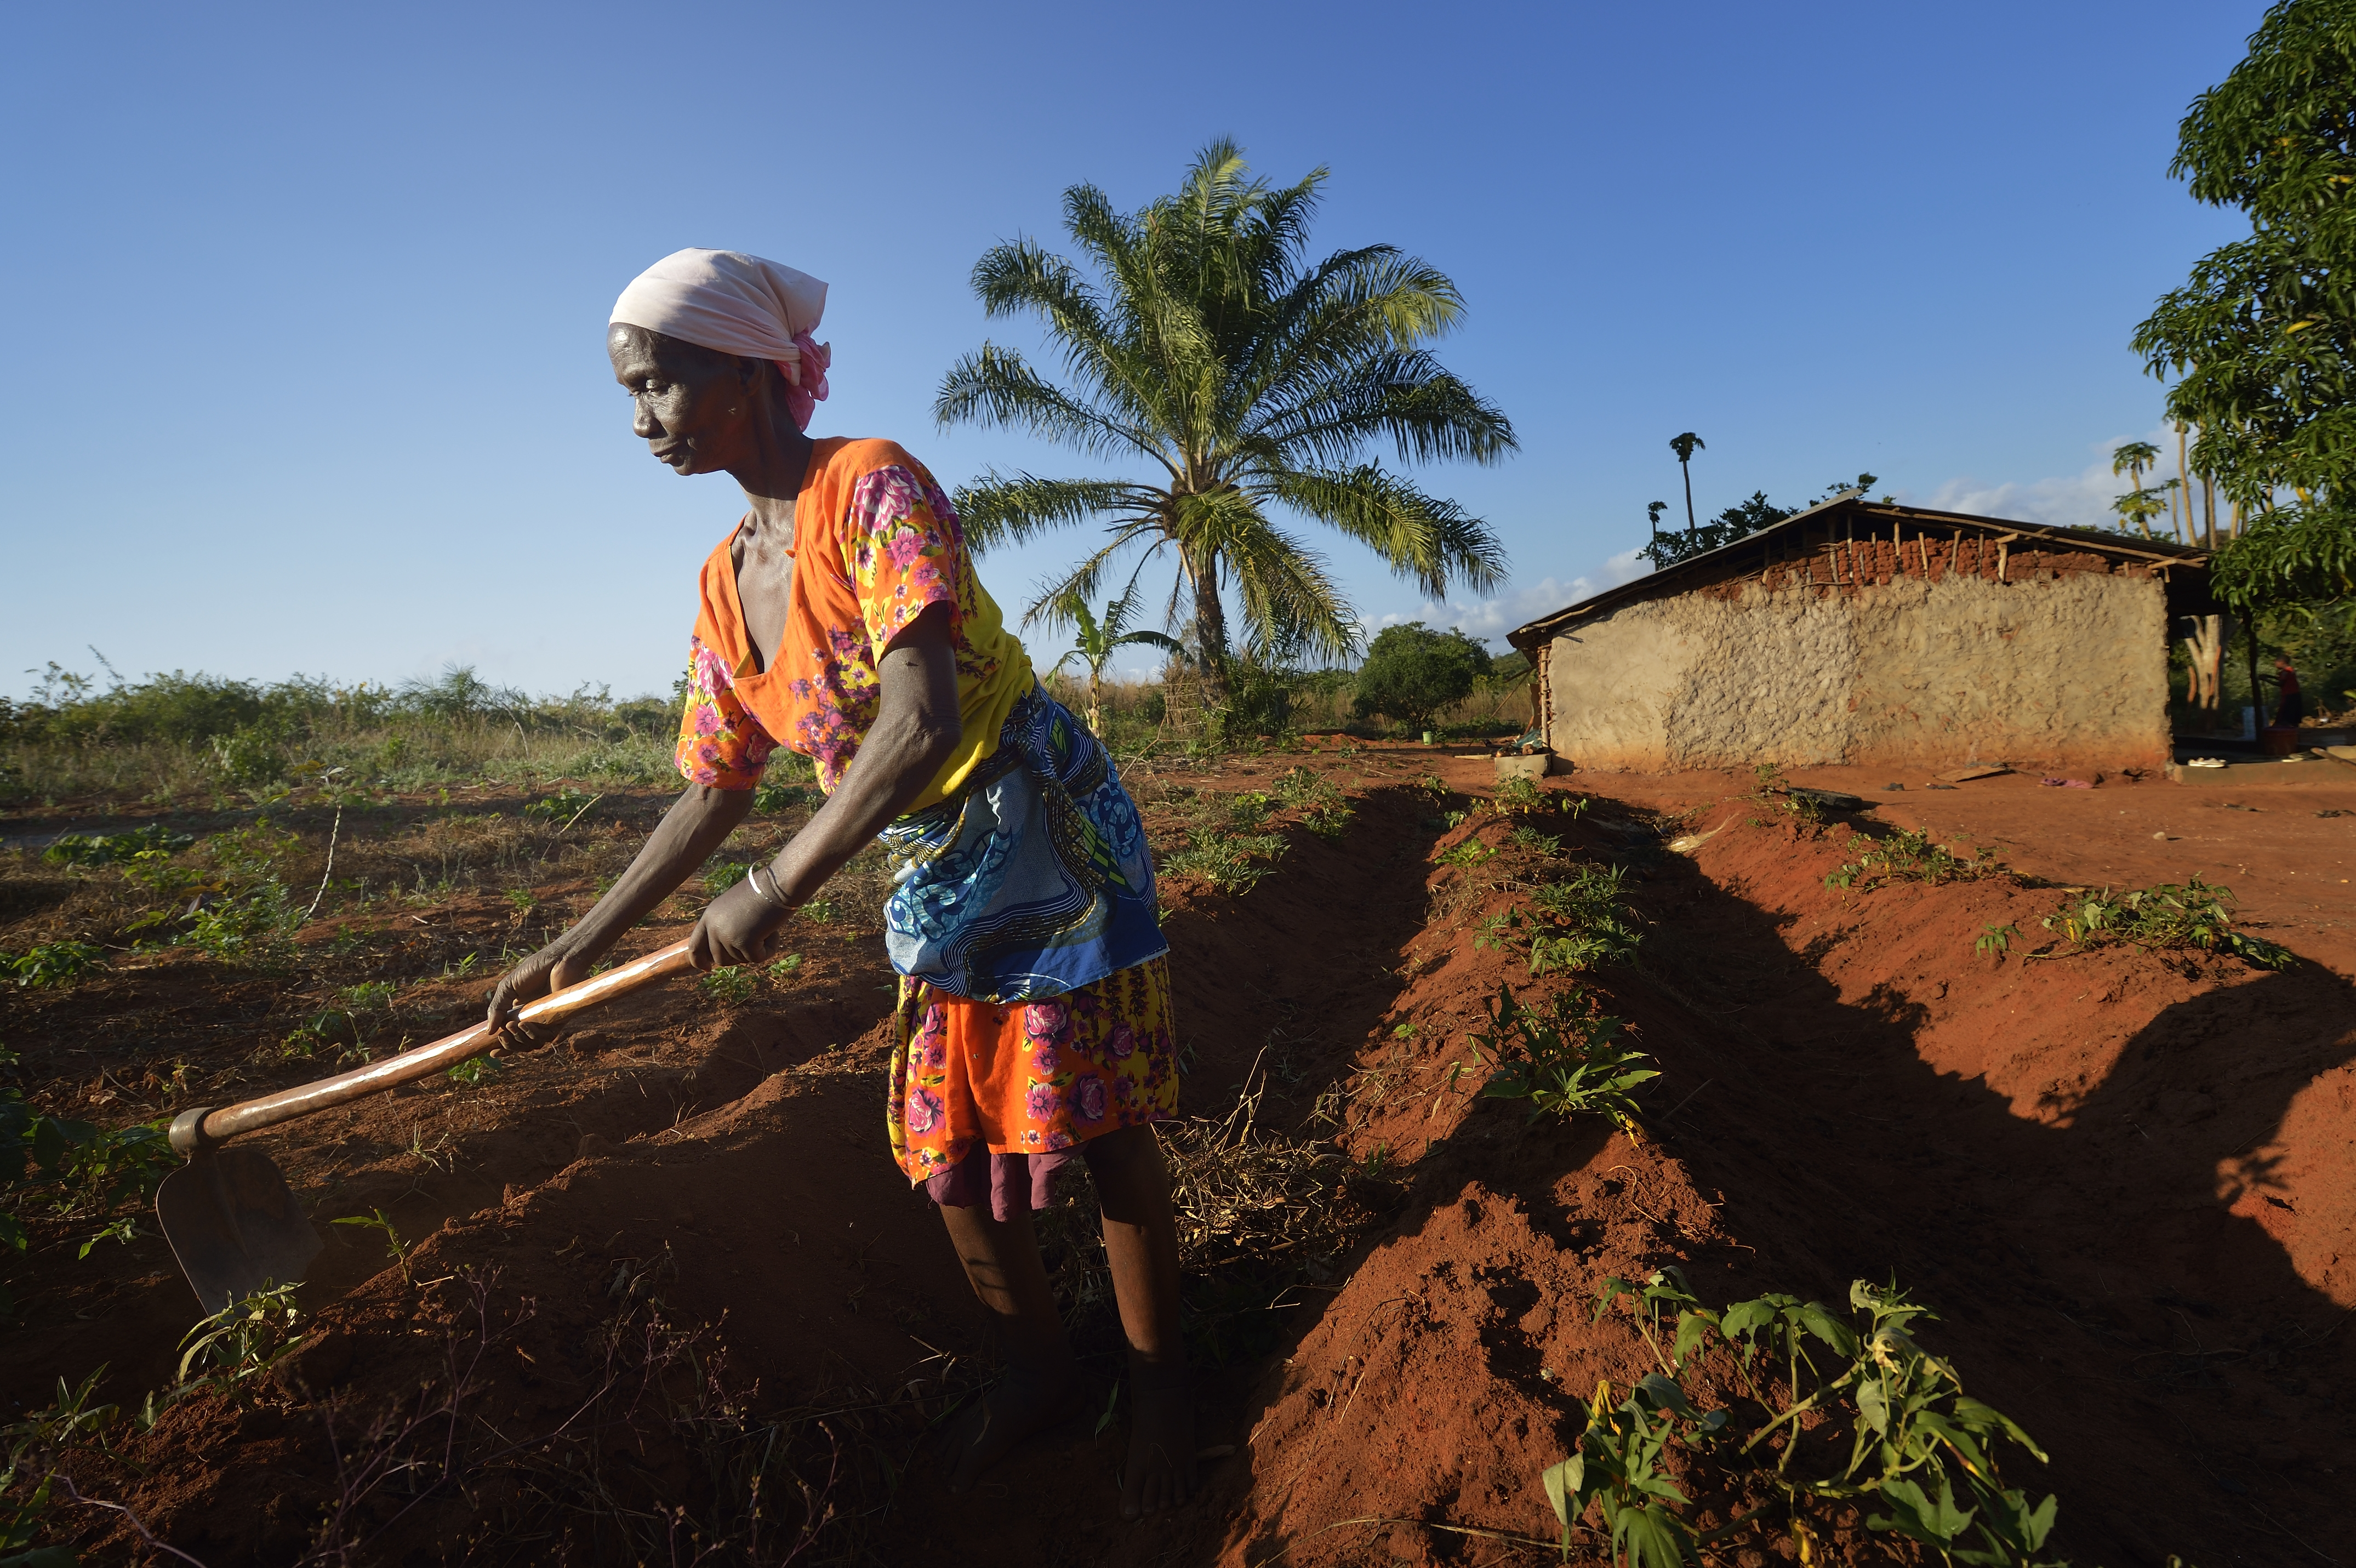 Women in Tanzania works the soil in a field with a concrete structure in the background